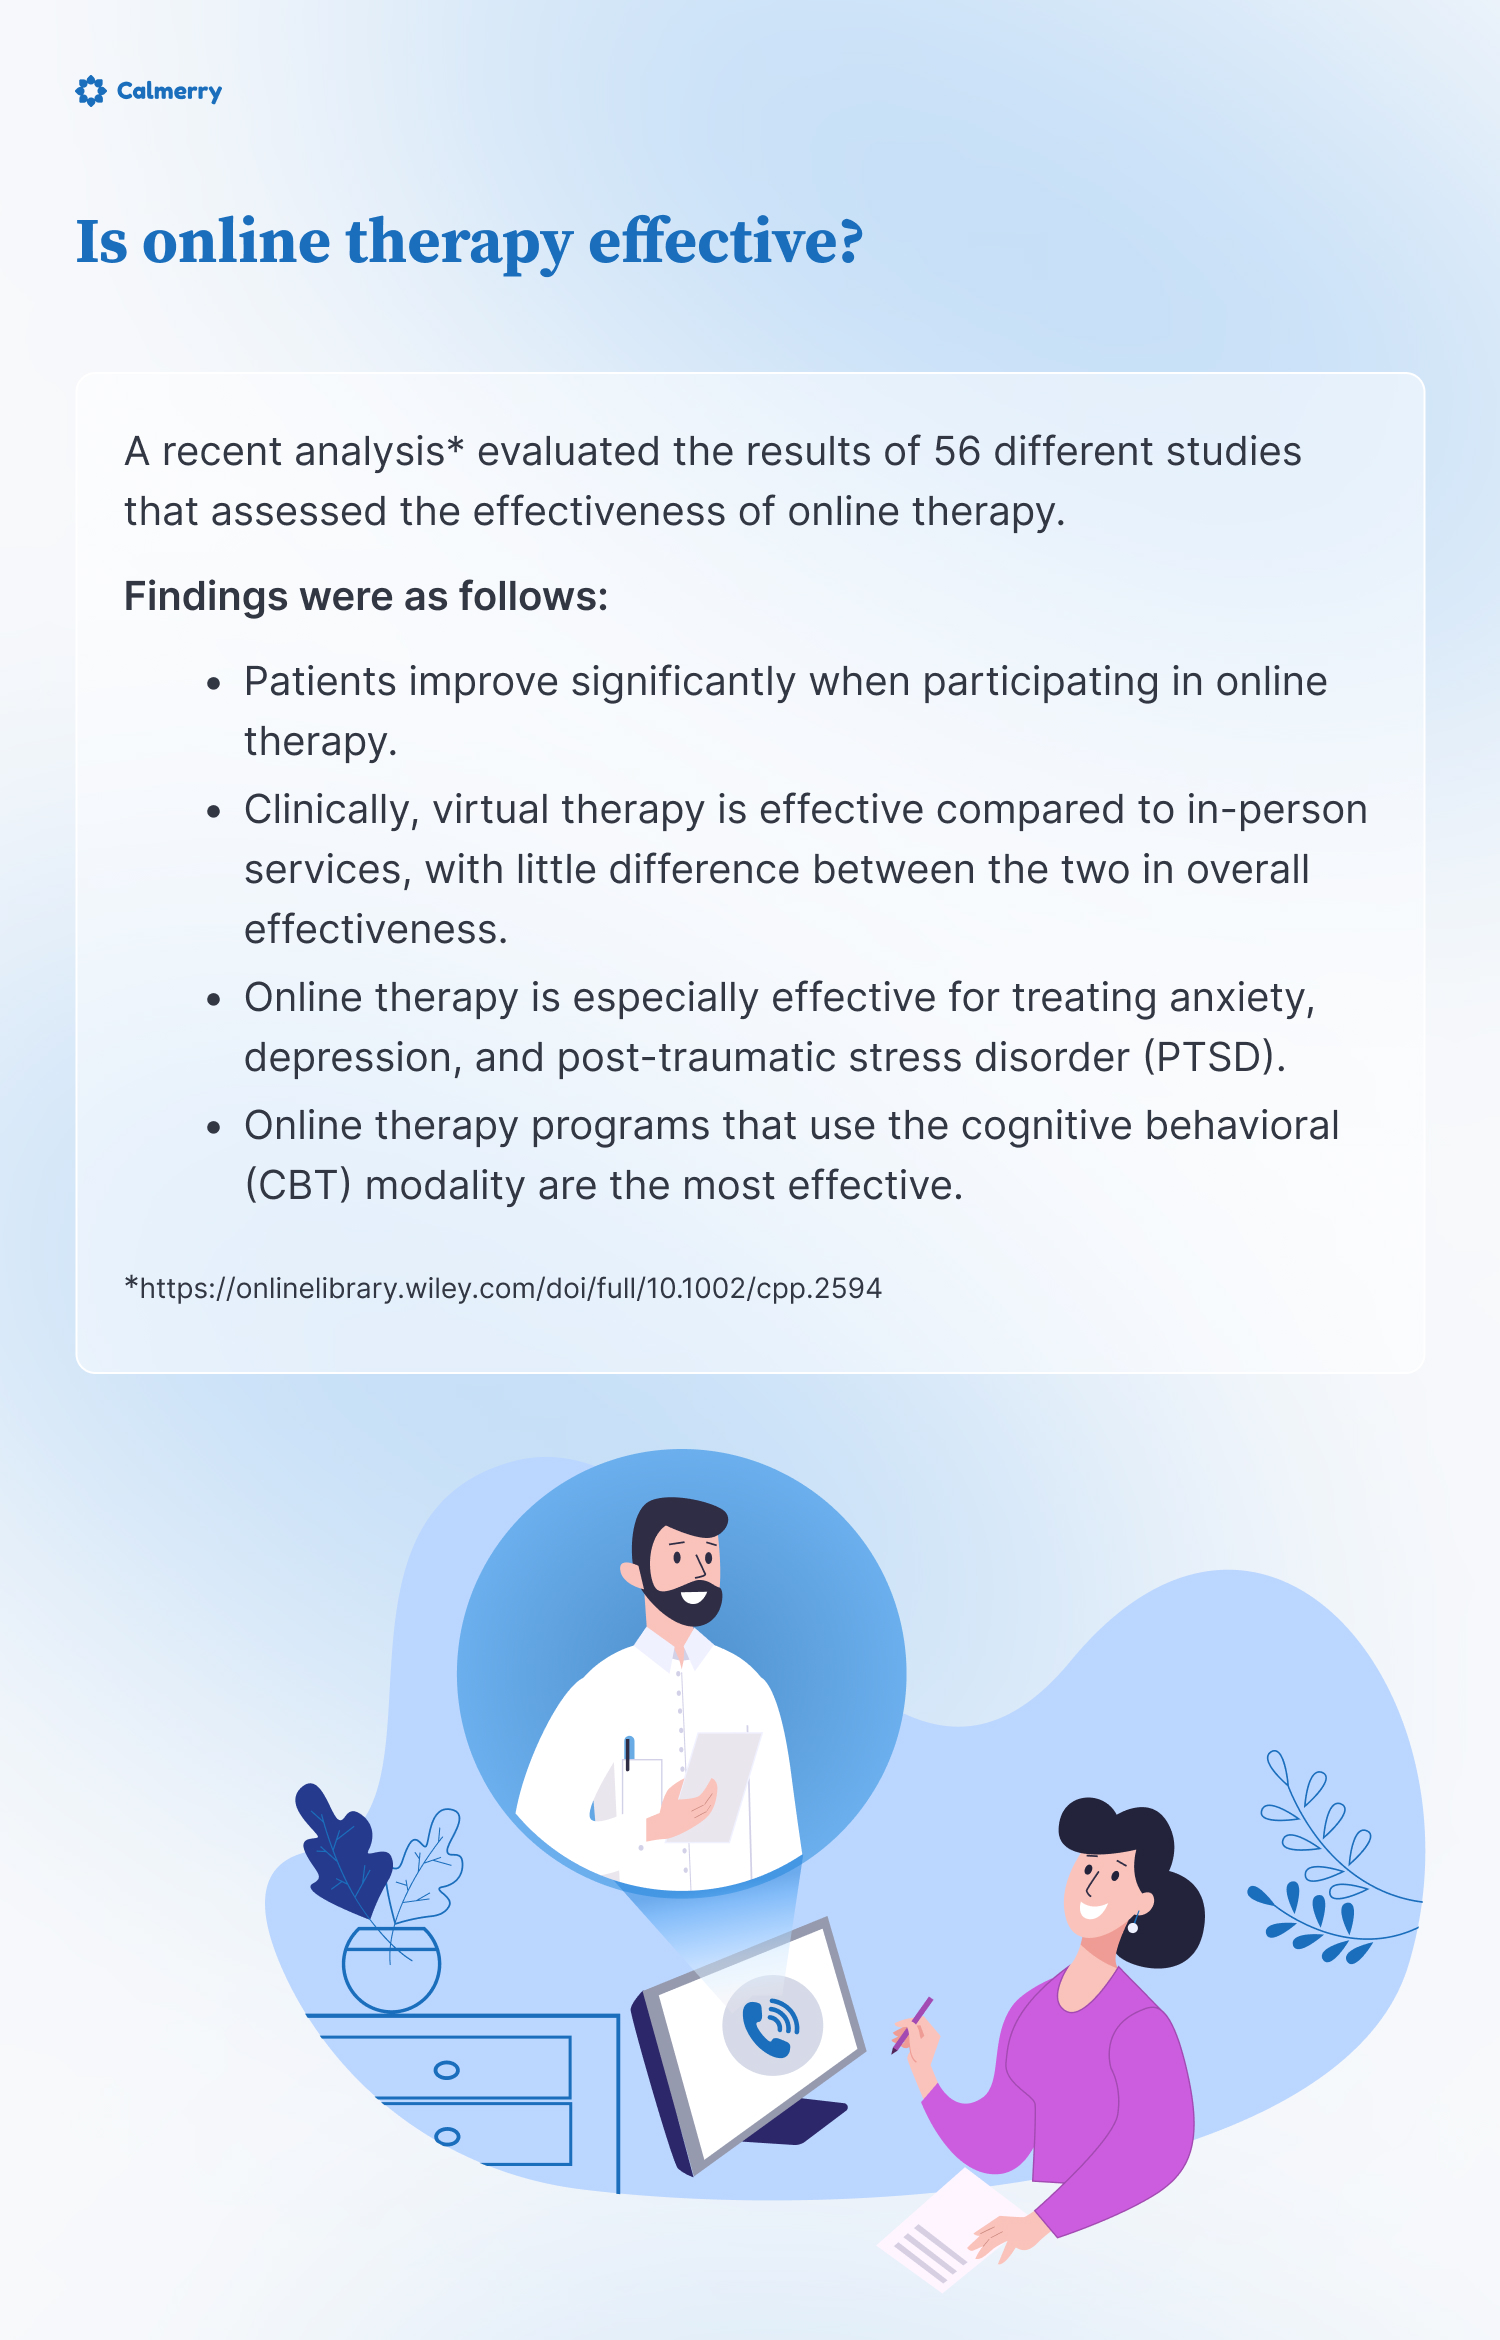 Is online therapy effective?
A recent analysis* evaluated the results of 56 different studies that assessed the effectiveness of online therapy. 
Findings were as follows:
Patients improve significantly when participating in online therapy.
Clinically, virtual therapy is effective compared to in-person services, with little difference between the two in overall effectiveness.
Online therapy is especially effective for treating anxiety, depression, and post-traumatic stress disorder (PTSD).
Online therapy programs that use the cognitive behavioral (CBT) modality are the most effective. 
*https://onlinelibrary.wiley.com/doi/full/10.1002/cpp.2594  
